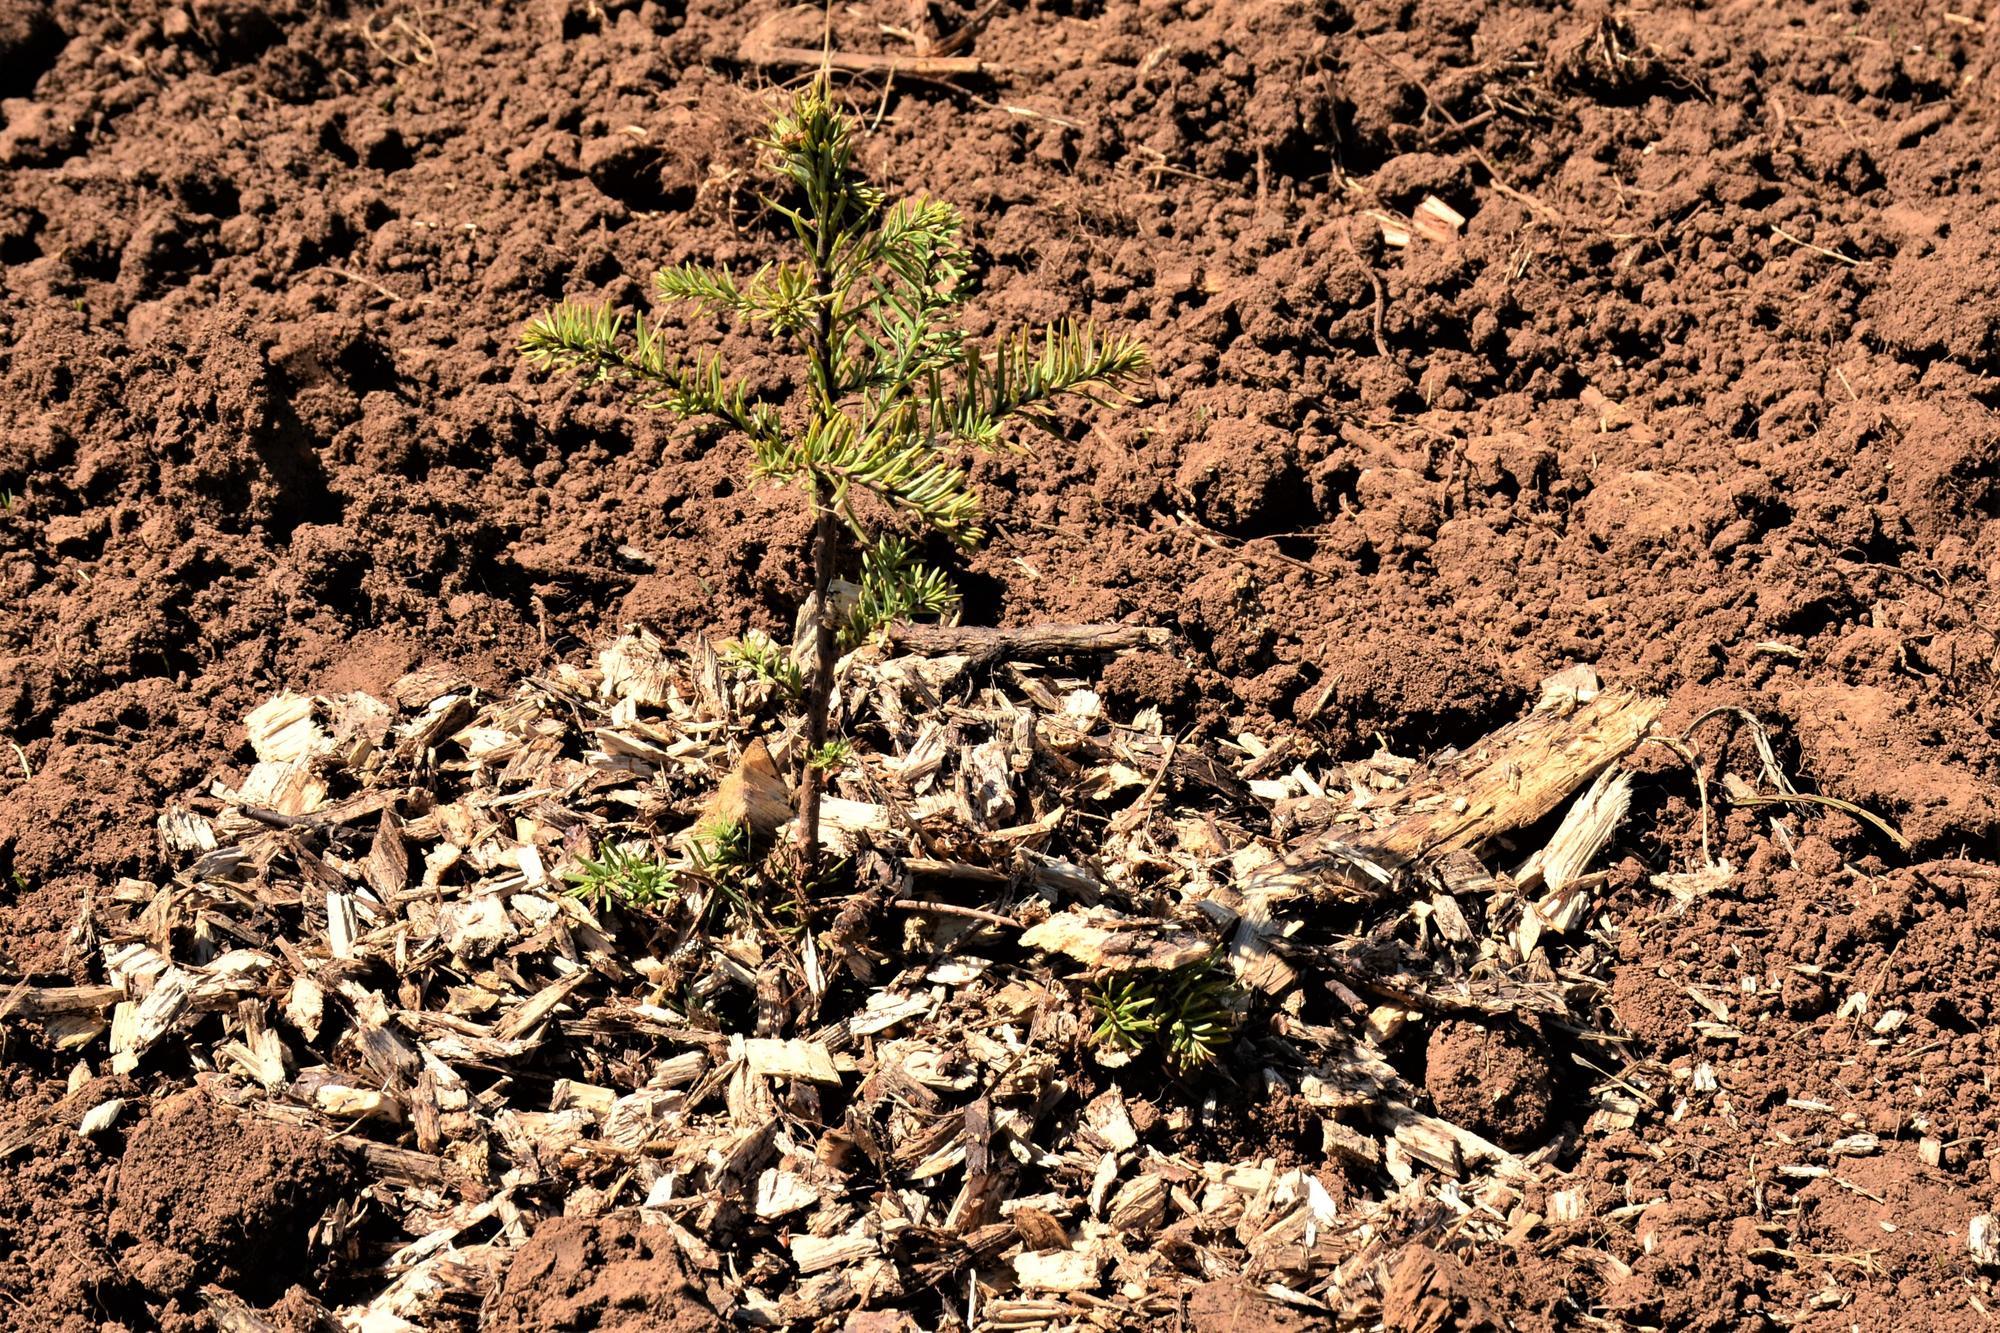 Mulching noble fir seedling with wood chips to increas soil moisture retention